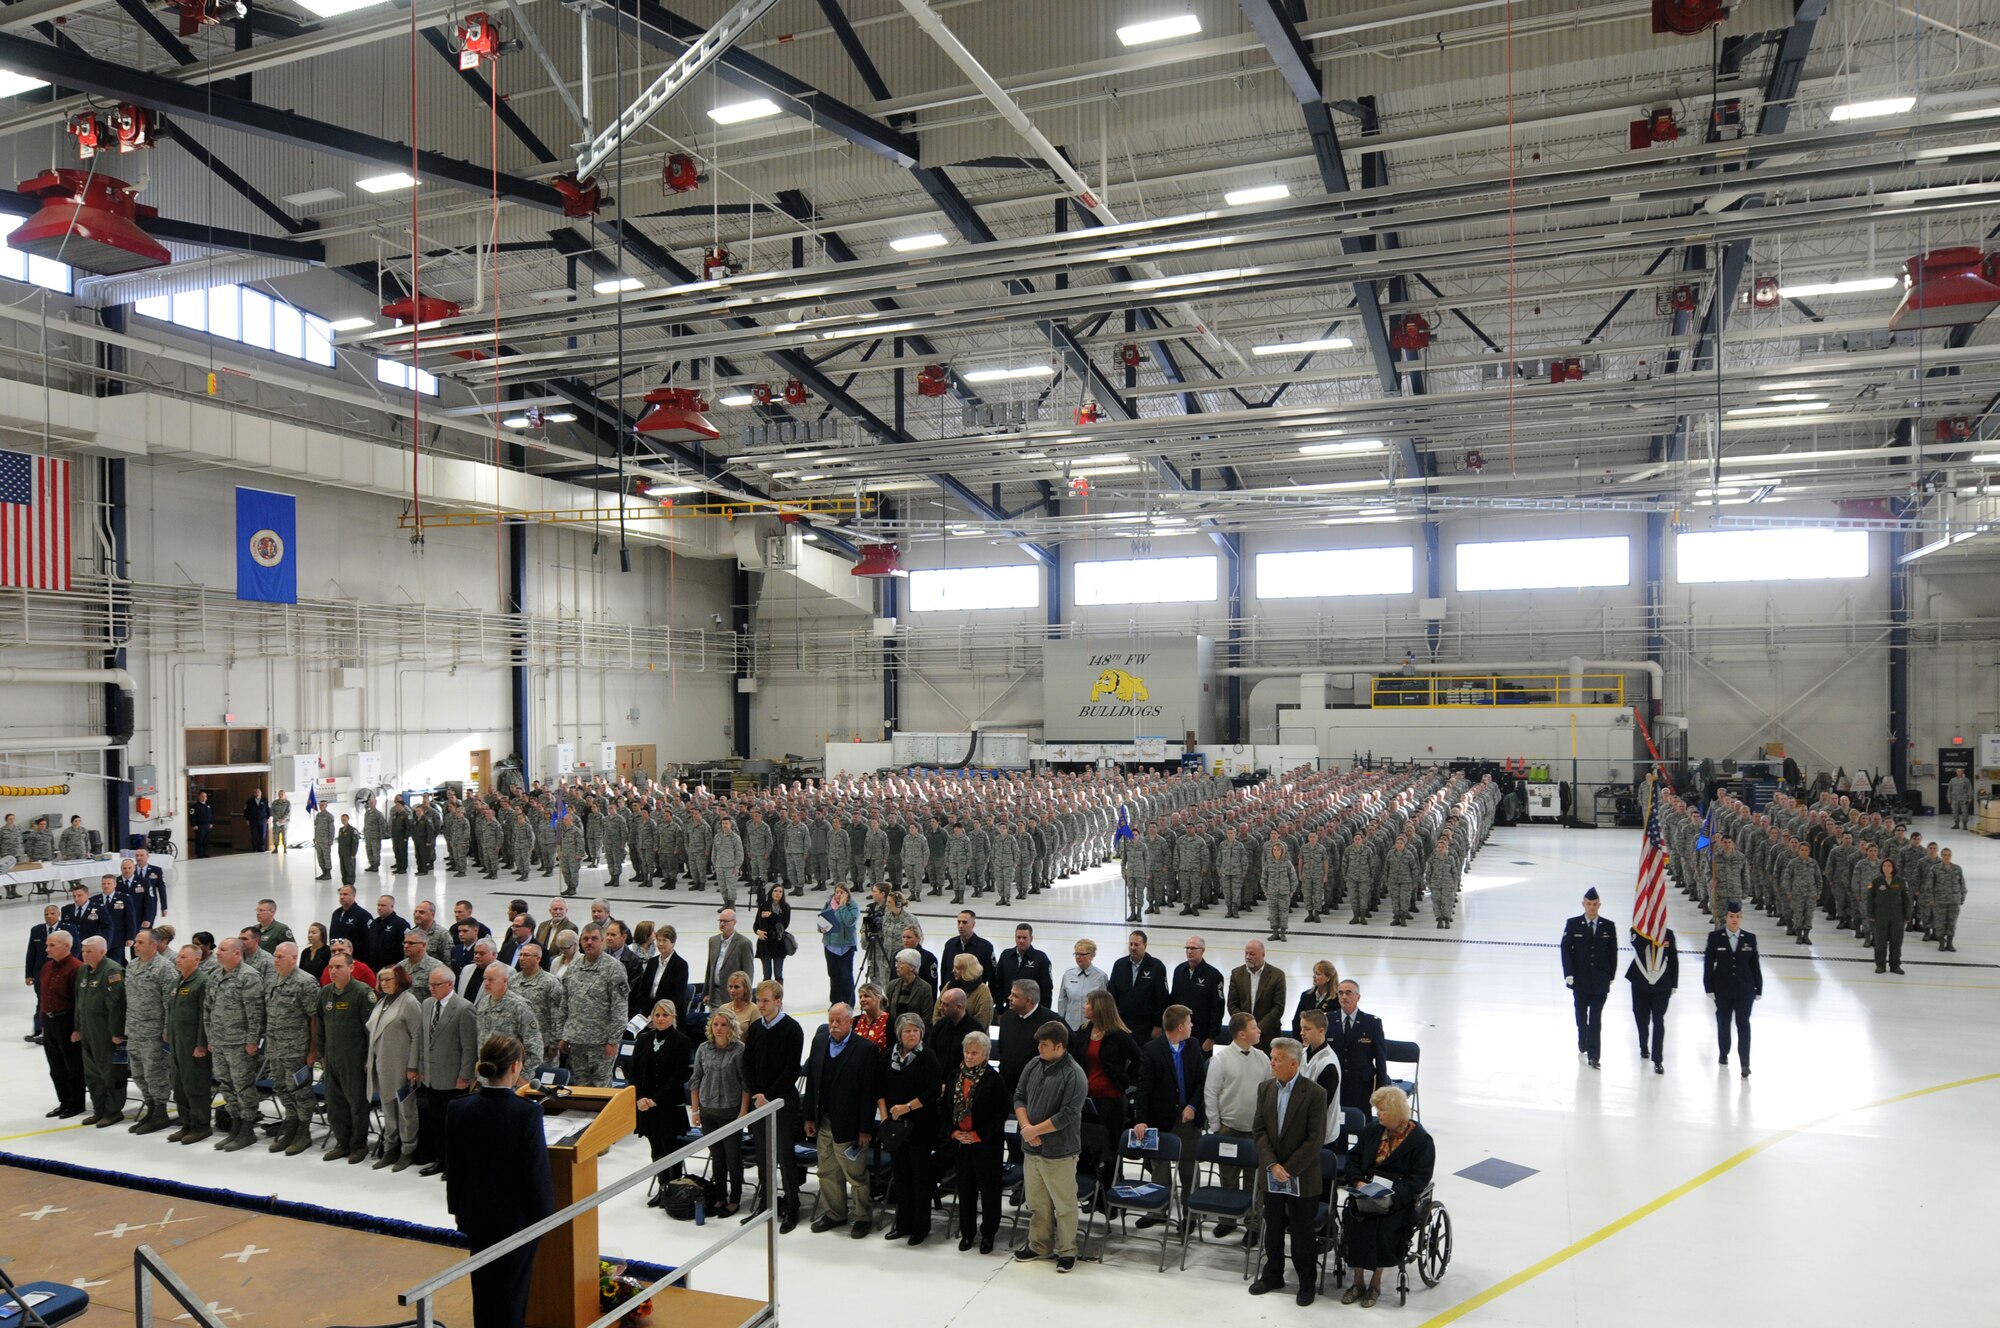 Airmen from the 148th Fighter Wing, Duluth, Minn. and guests stand at attention before Col. Jon S. Safstrom accepts command of the Wing, Nov. 14, 2015. Safstrom assumed command from Col. Frank H. Stokes who accepted a position at the National Guard Bureau, Arlington, Va. (U.S. Air Force photo by Tech. Sgt. Amie Muller/released)